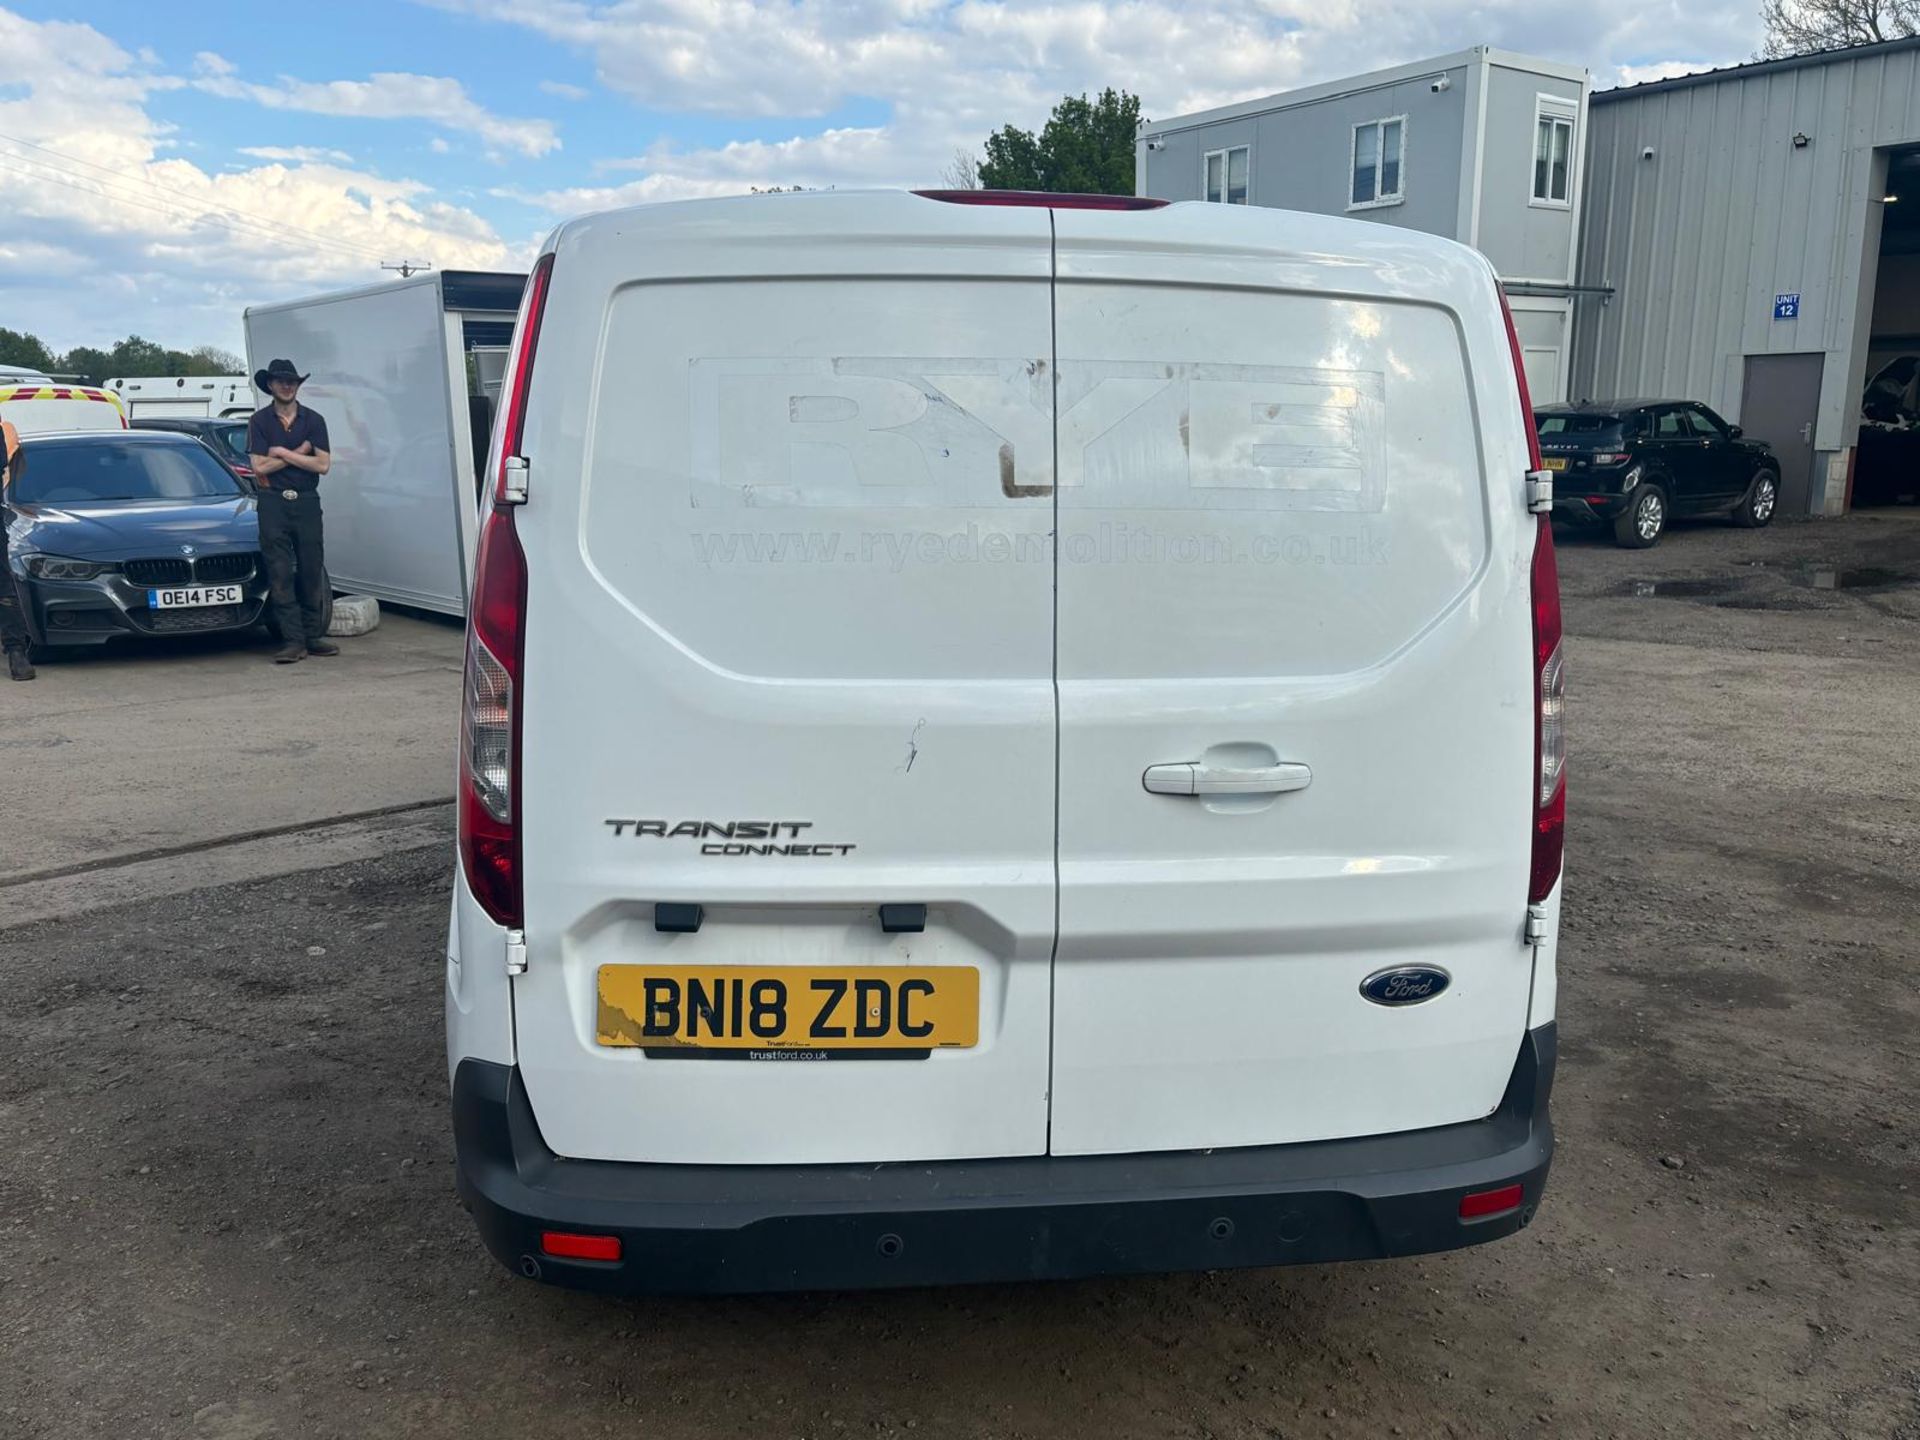 2018 18 FORD TRANSIT CONNECT LIMITED PANEL VAN - 75K MILES - EURO 6 - AIR CON - ALLOY WHEELS  - Image 3 of 12